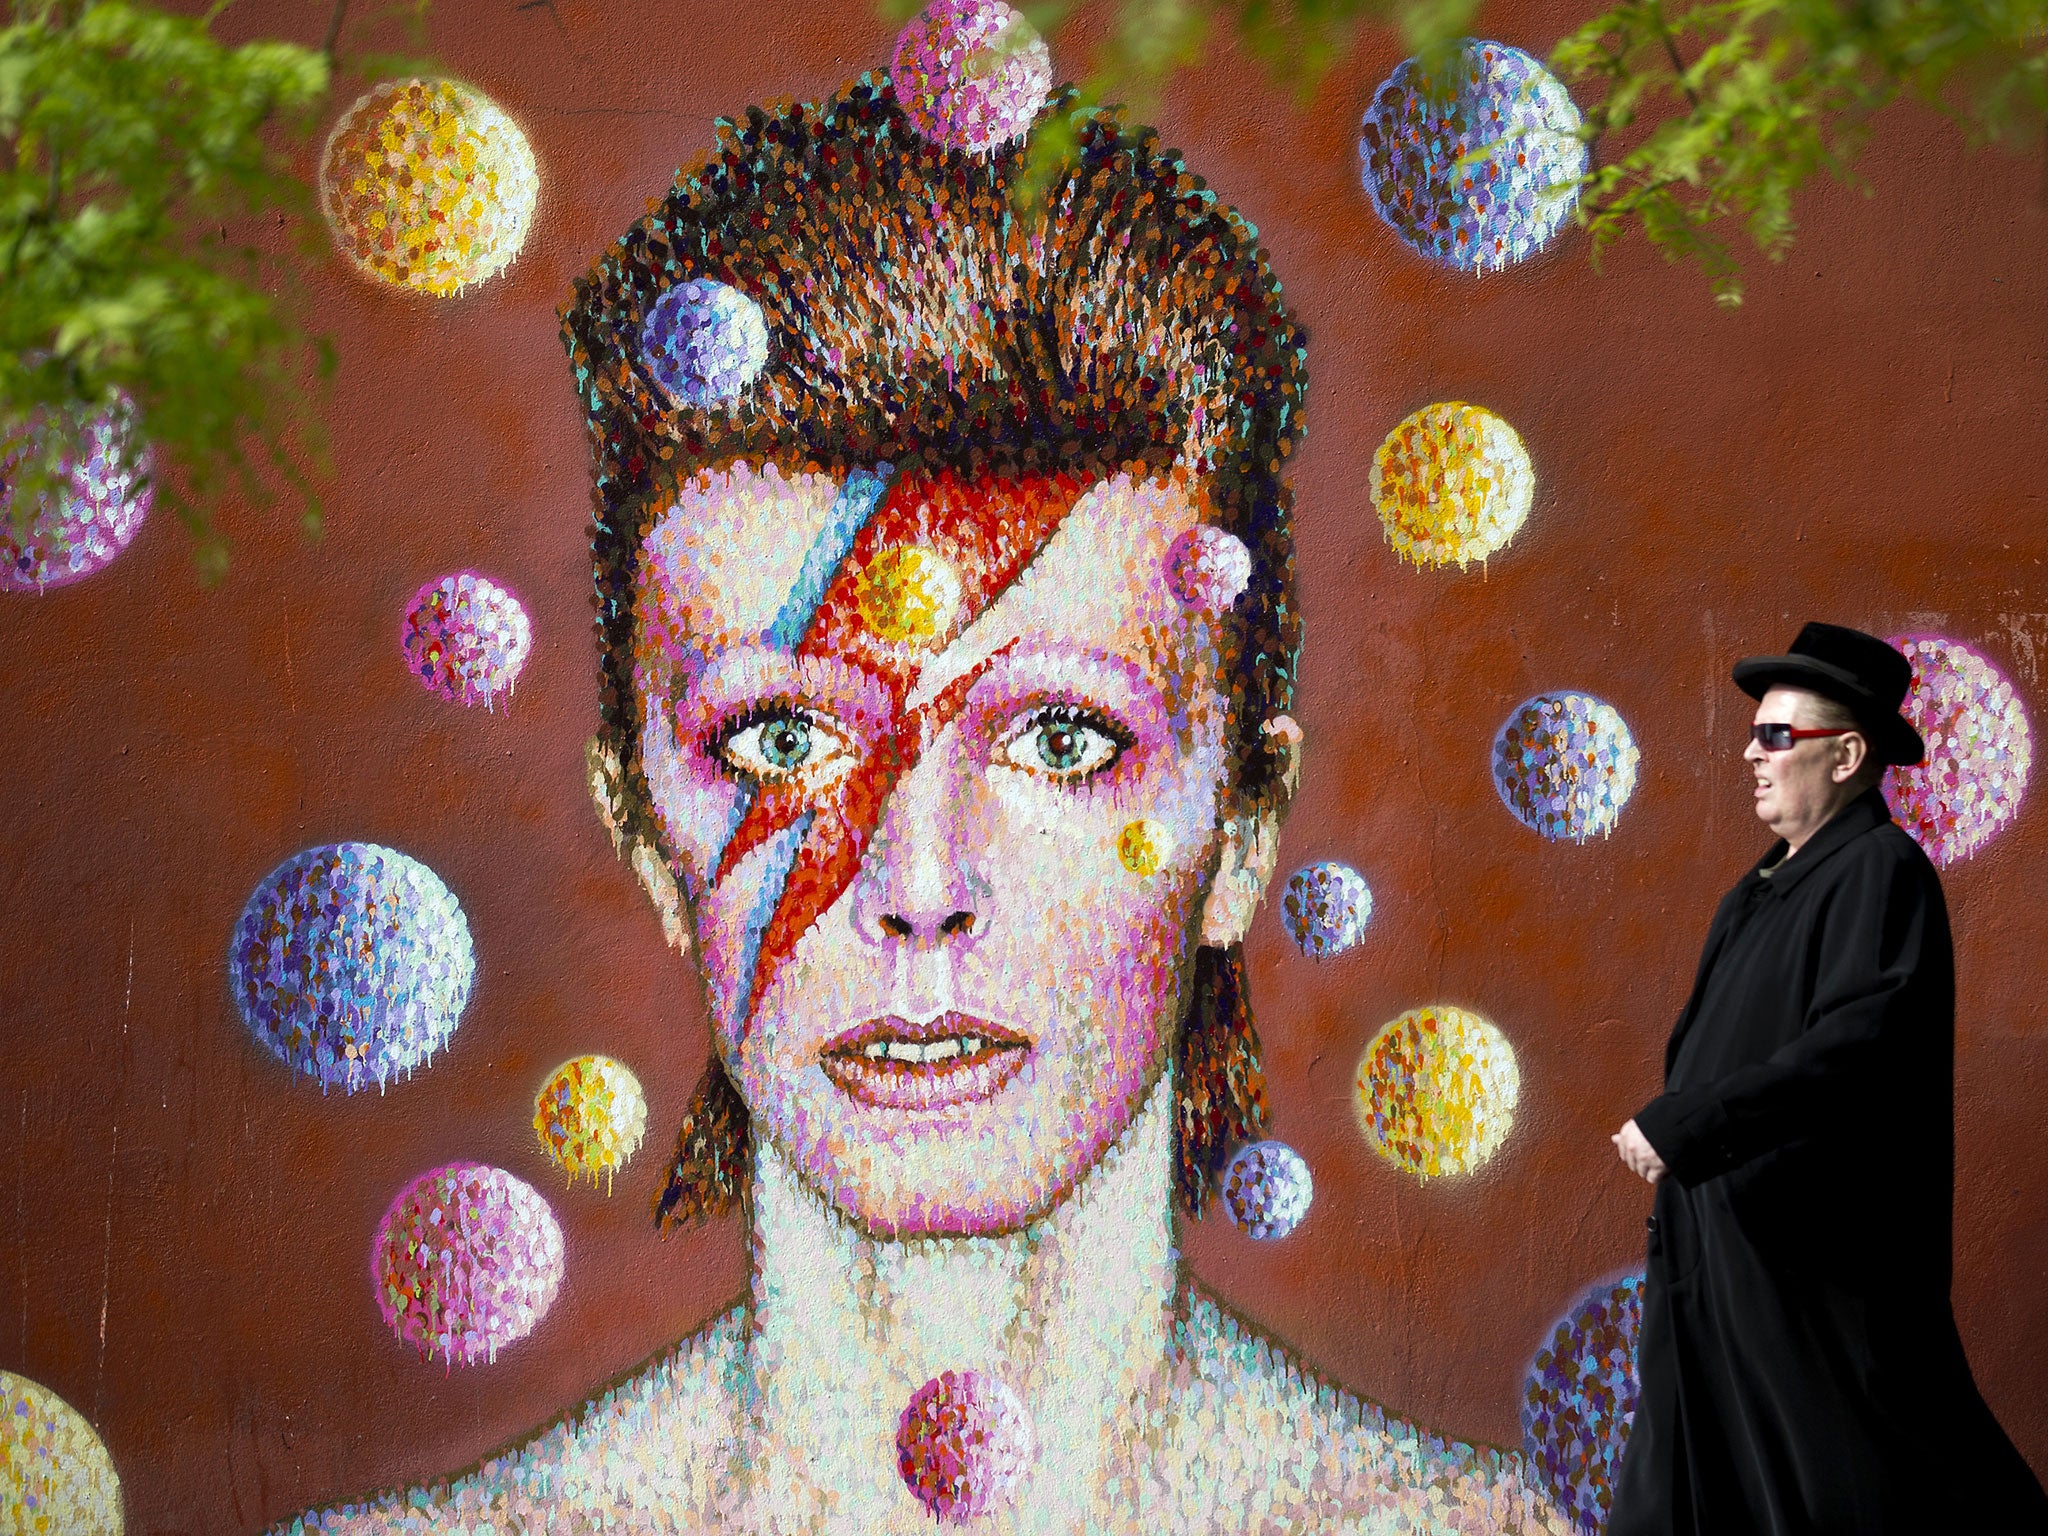 A man walks past a 3D wall portrait of British musician David Bowie, created by Australian street artist James Cochran, also known as Jimmy C, in Brixton, South London, on 19 June, 2013